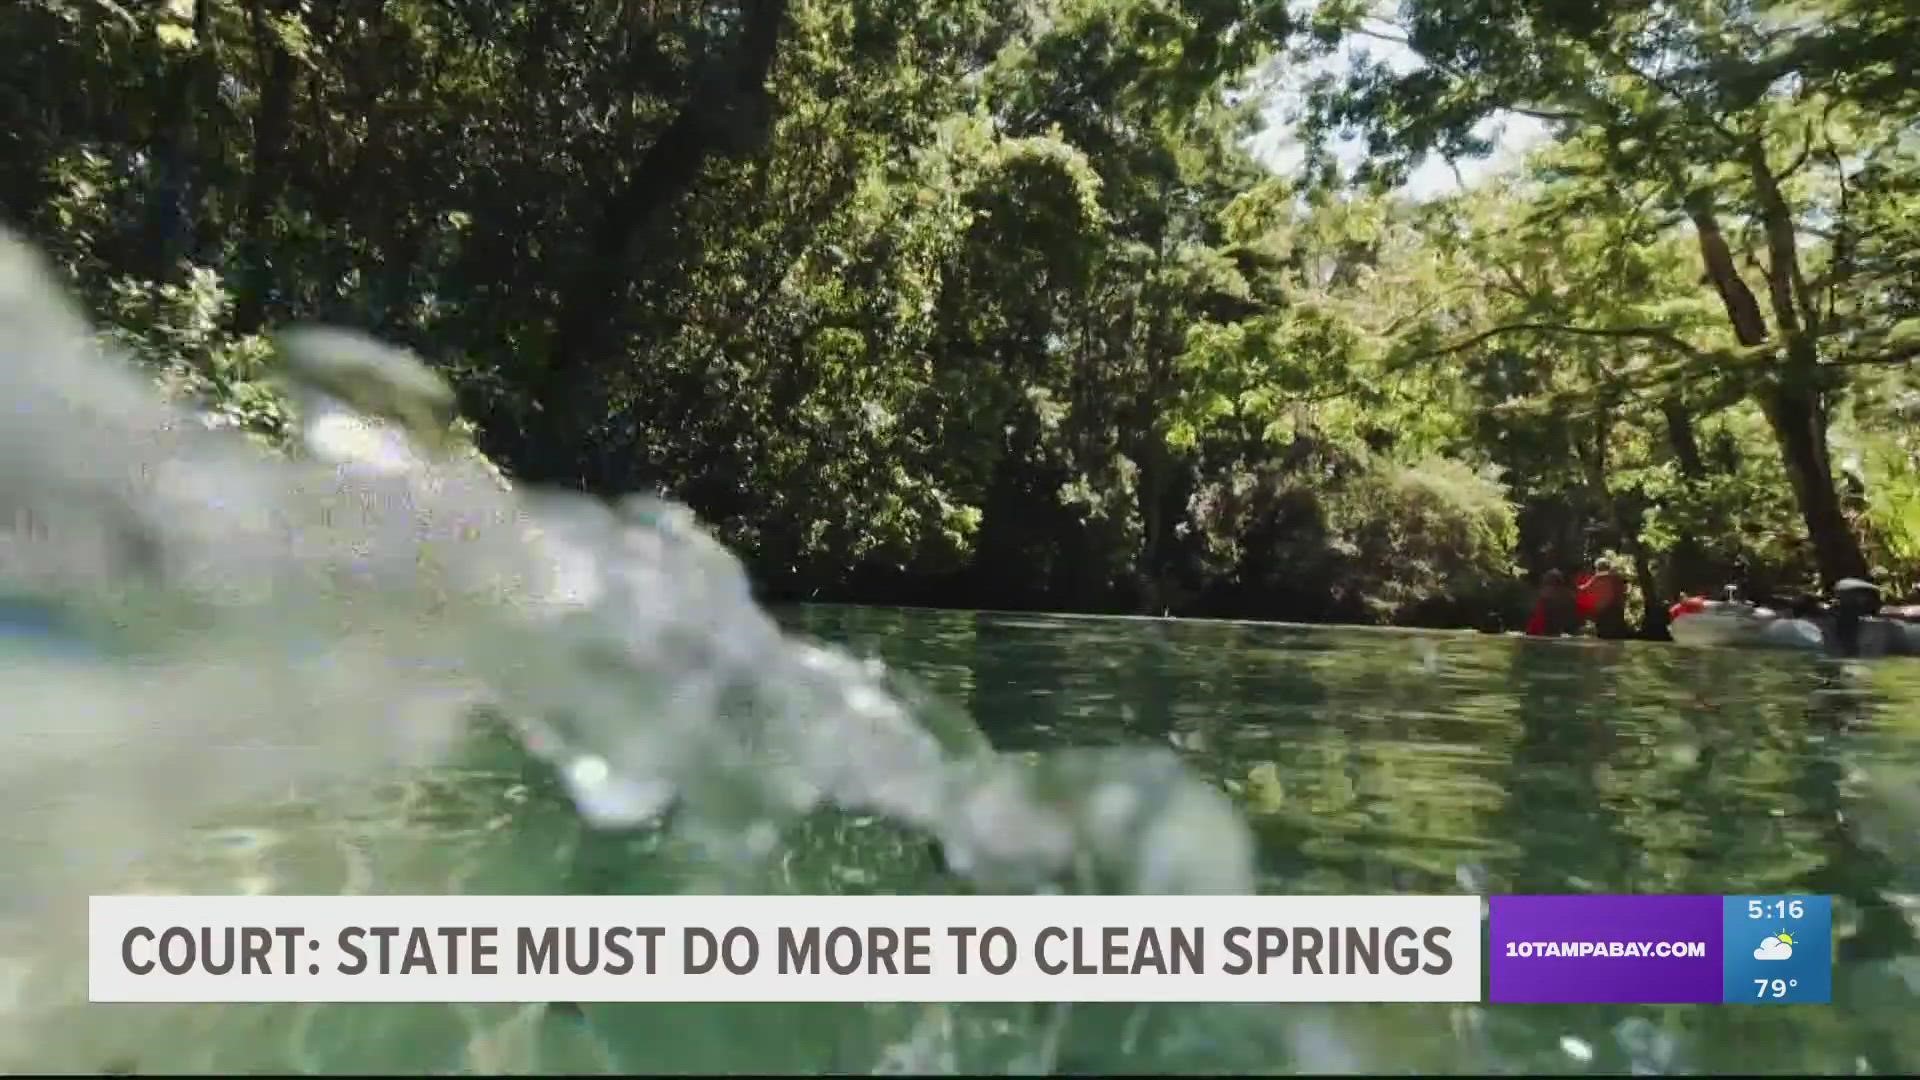 "This allows us to hold polluters accountable," Ryan Smart of the Florida Springs Council said after Wednesday's ruling.